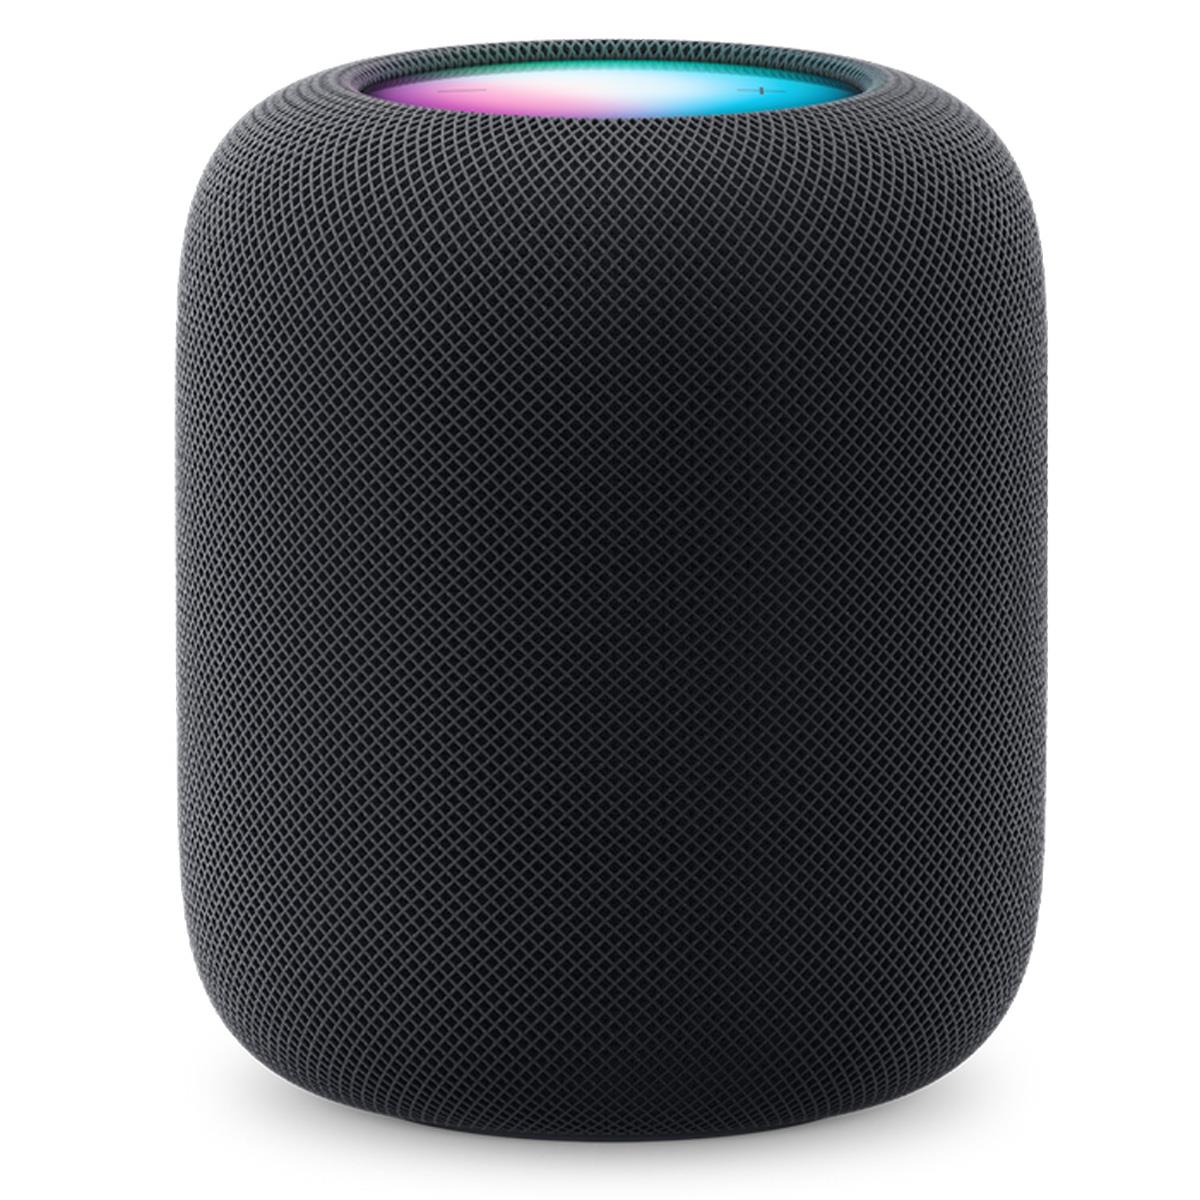 Image of Apple HomePod 2nd Generation